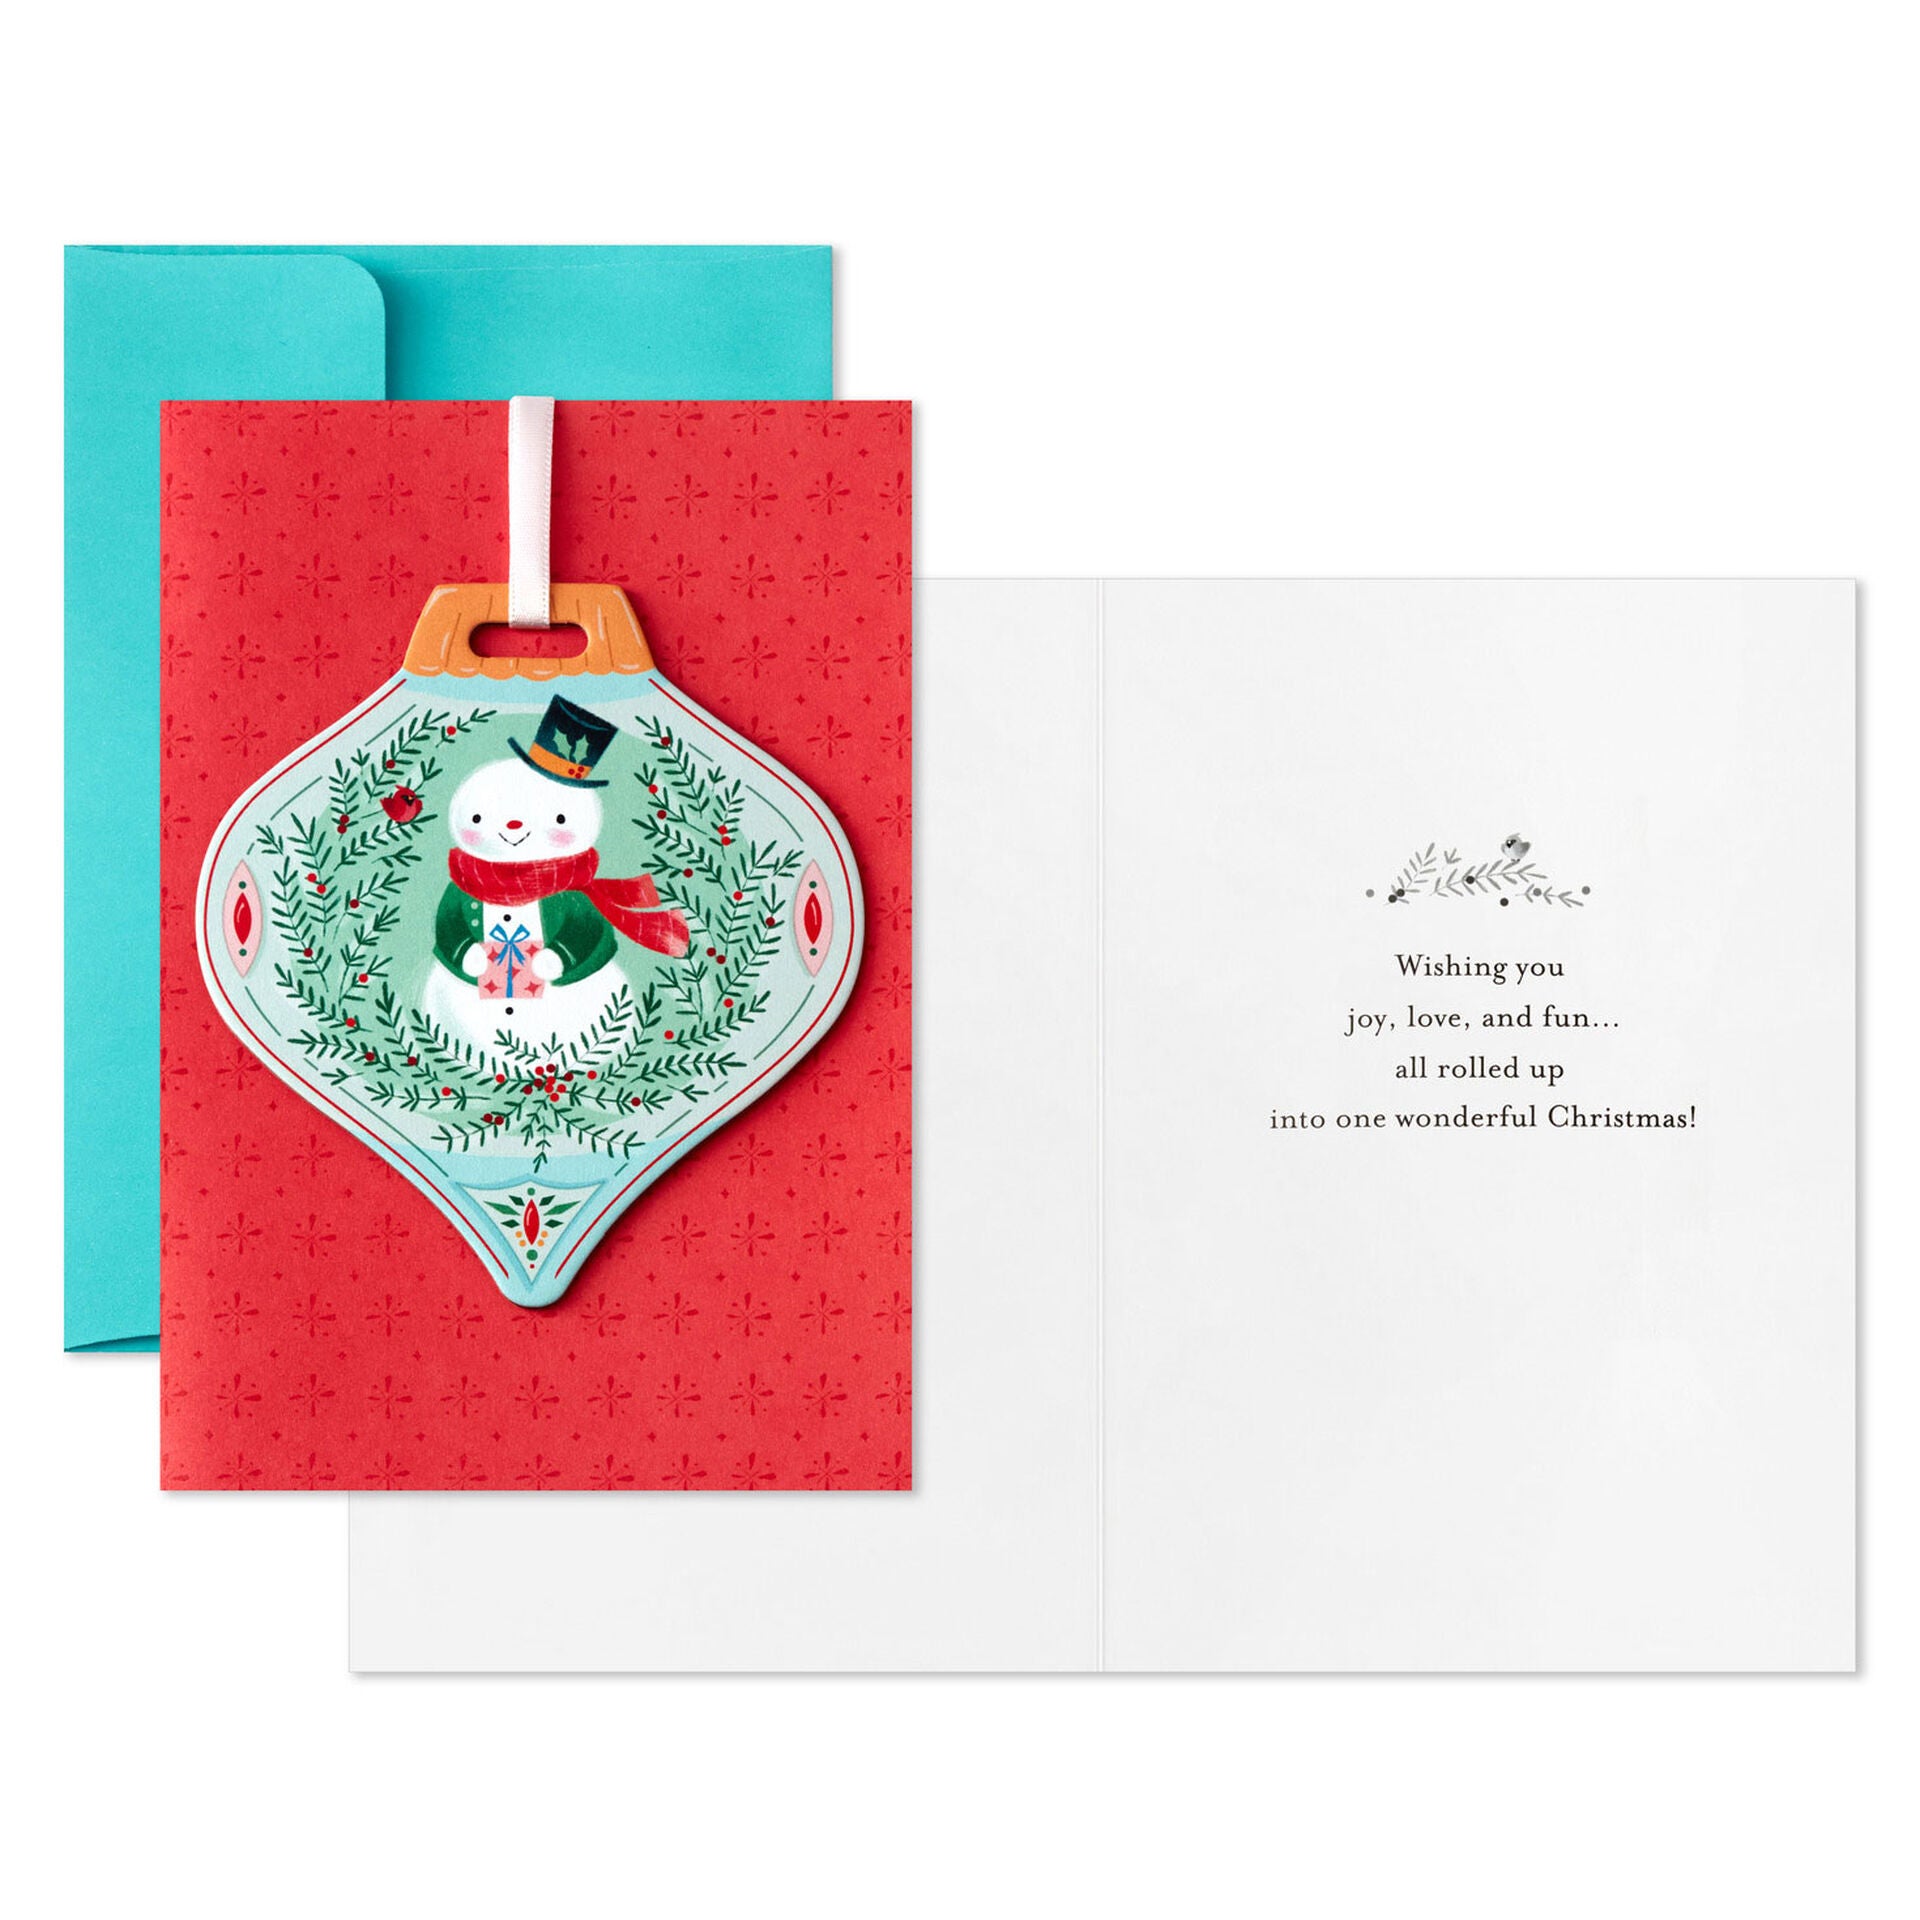 Snowman With Gift Boxed Christmas Cards With Detachable Ornaments, Pack of 10Copy of Bird and Botanical Banner Boxed Christmas Cards, Pack of 16